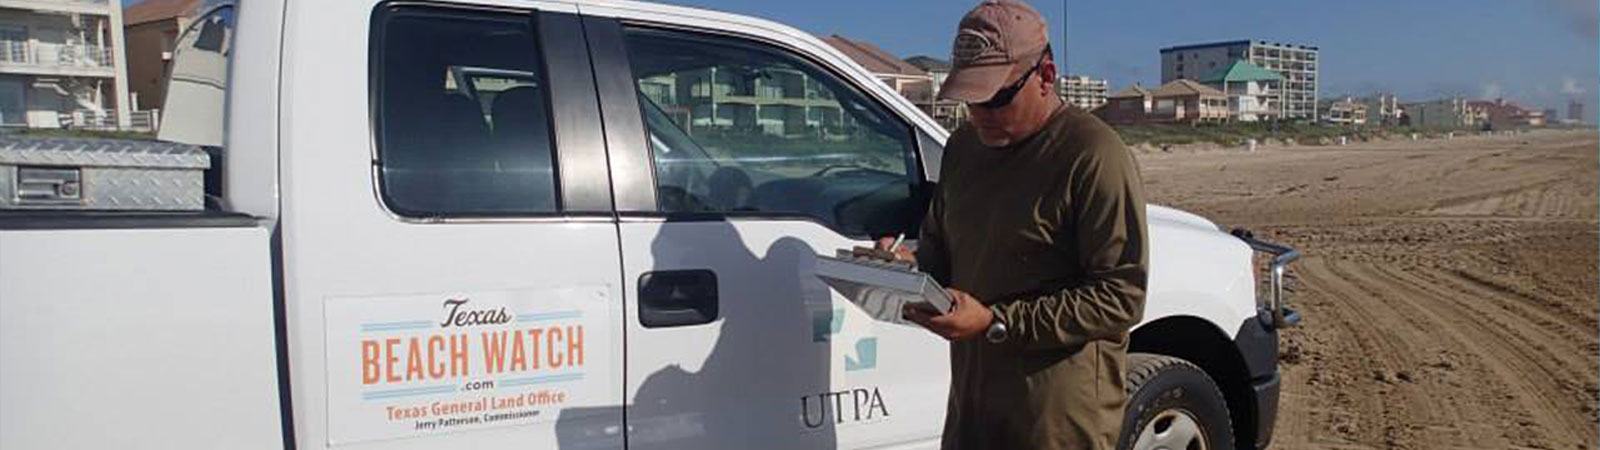 A person stands beside a white pickup truck on a sandy beach. The truck features the “Texas Beach Watch” logo, the Texas General Land Office emblem, and the text “UTPA.” The person wears a cap, sunglasses, and holds a clipboard or tablet. This image likely relates to fieldwork or environmental monitoring by Texas Beach Watch. 